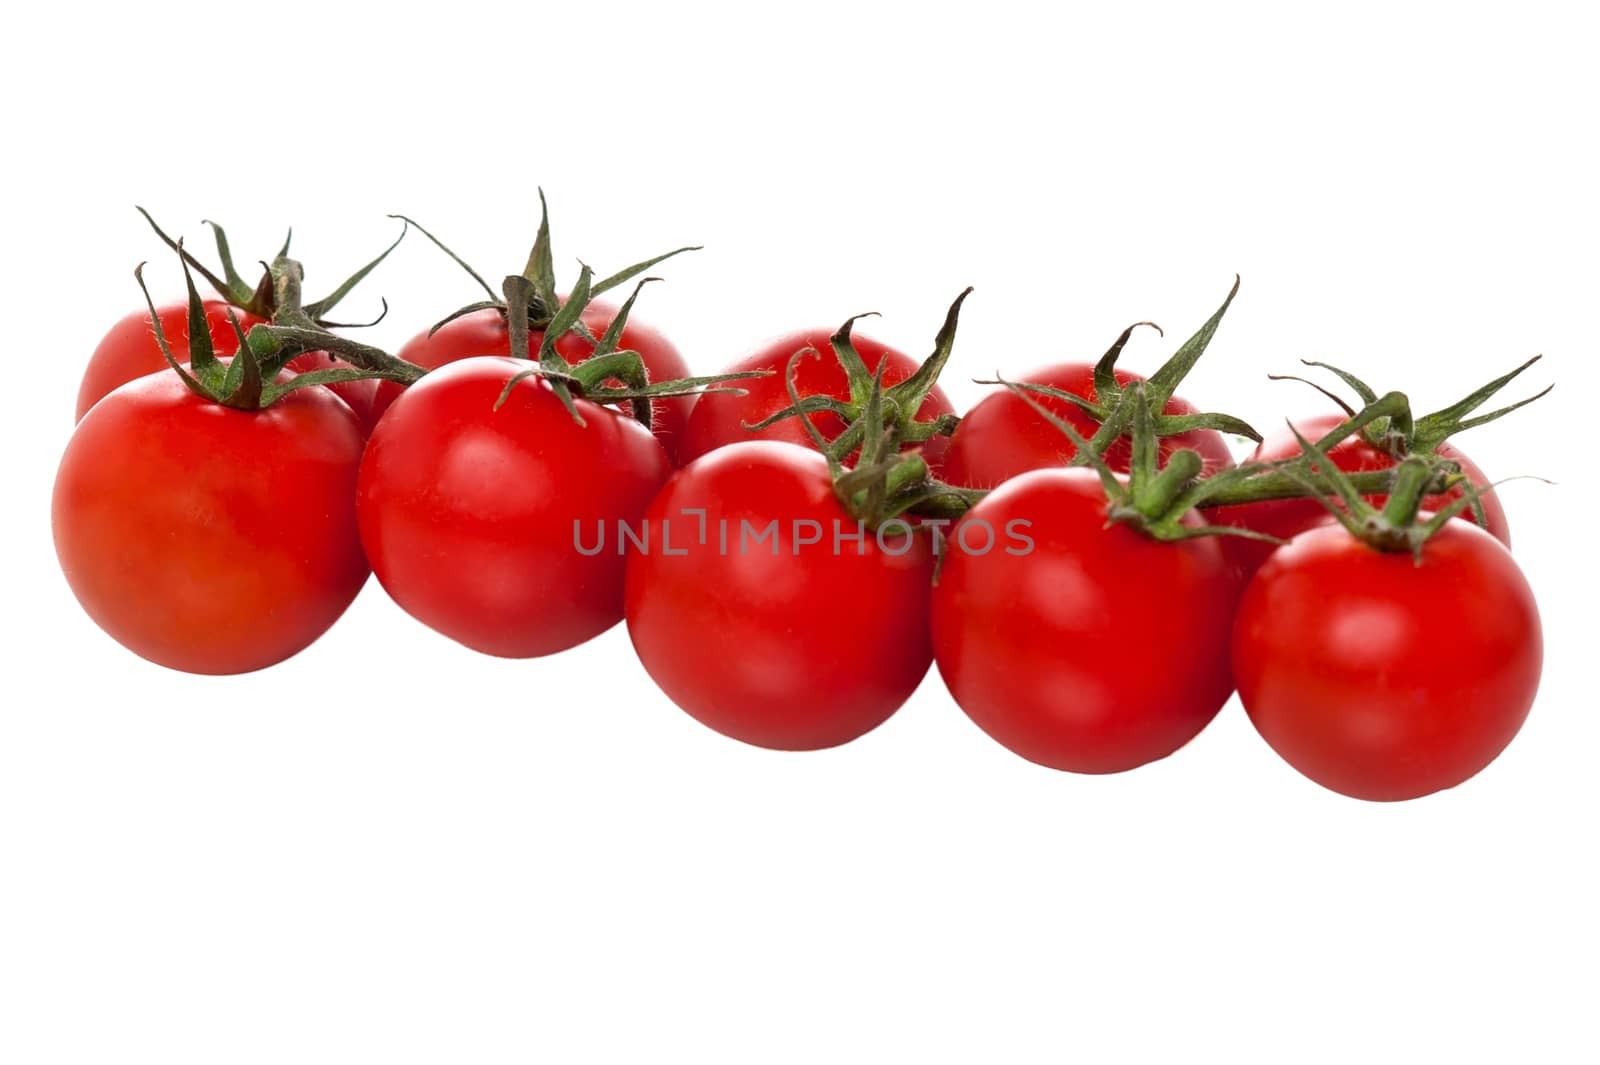 Fresh cherry tomatoes organized cleanly against white